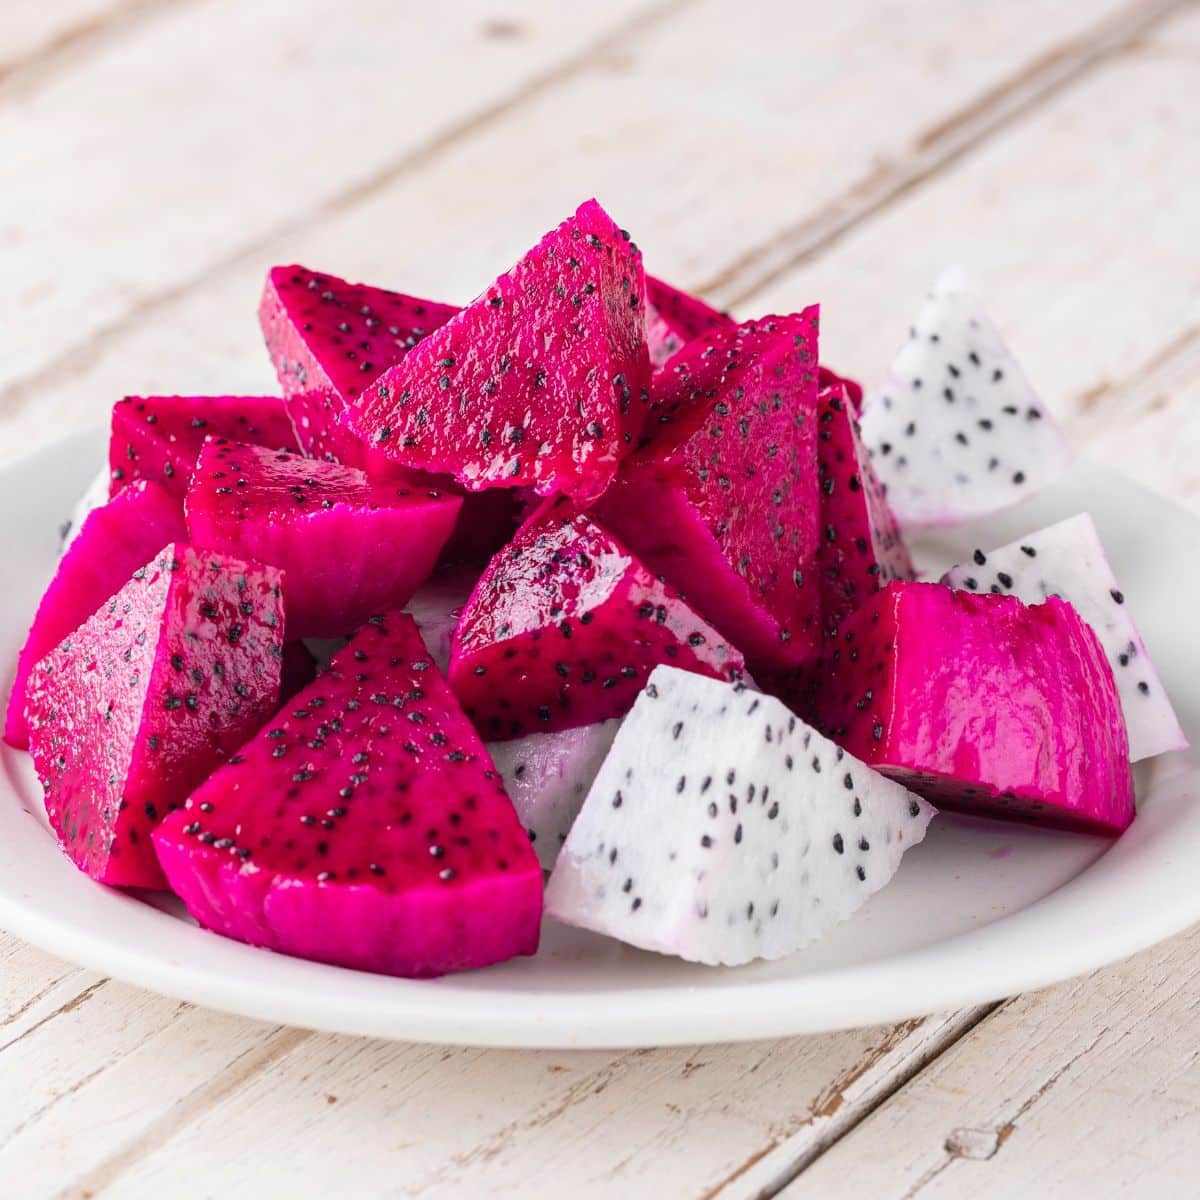 red and white dragon fruit wedges.